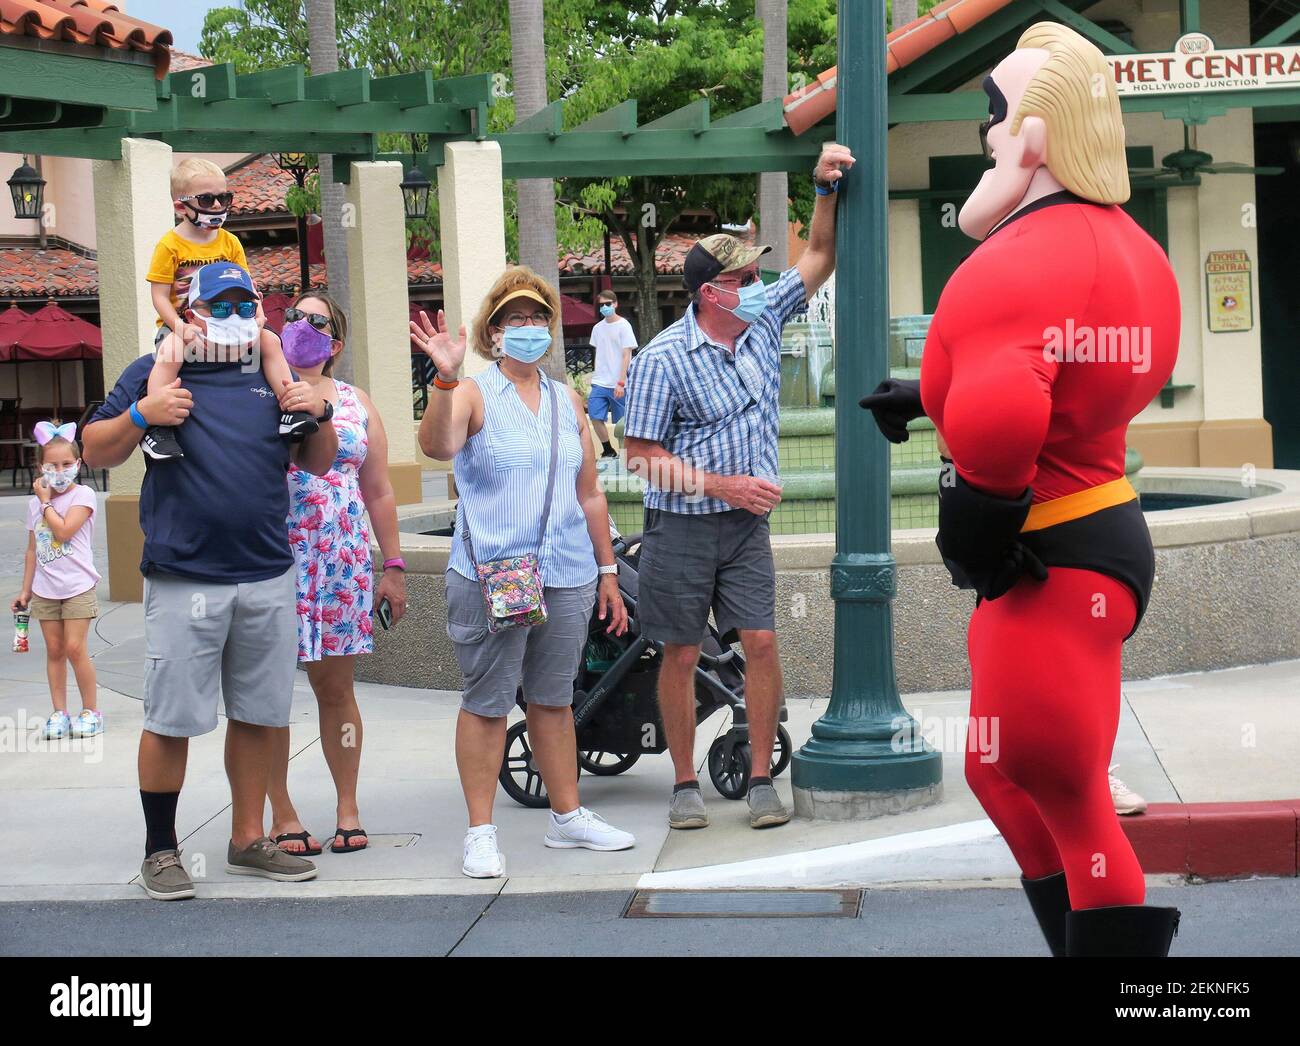 Guests wave to Mr. Incredible during a pop-up appearance of Pixar characters at Disney's Hollywood Studios at Walt Disney World, on the second day of the park's re-opening, in Lake Buena Vista, Florida, on Thursday, July 16, 2020. All four of Disney's Florida parks are now open, including Epcot, the Magic Kingdom and Animal Kingdom, with limited capacity and safety protocols in place in response to the coronavirus pandenmic. (Joe Burbank/Orlando Sentinel/TNS) Stock Photo